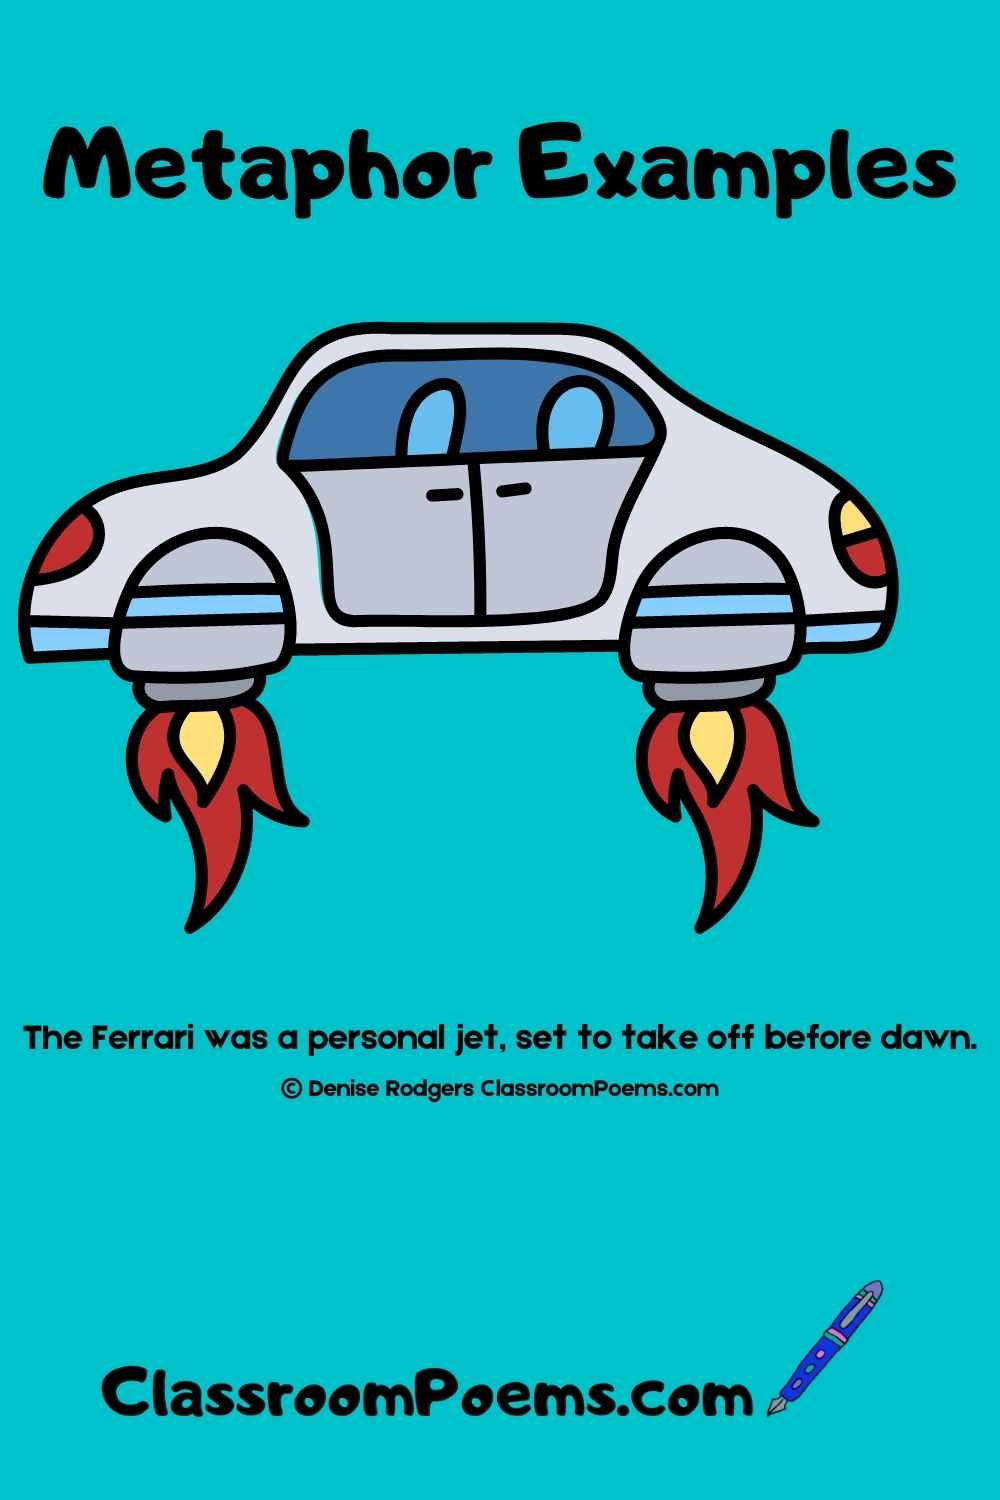 Jet propelled car metaphor example by Denise Rodgers on  ClassroomPoems.com.